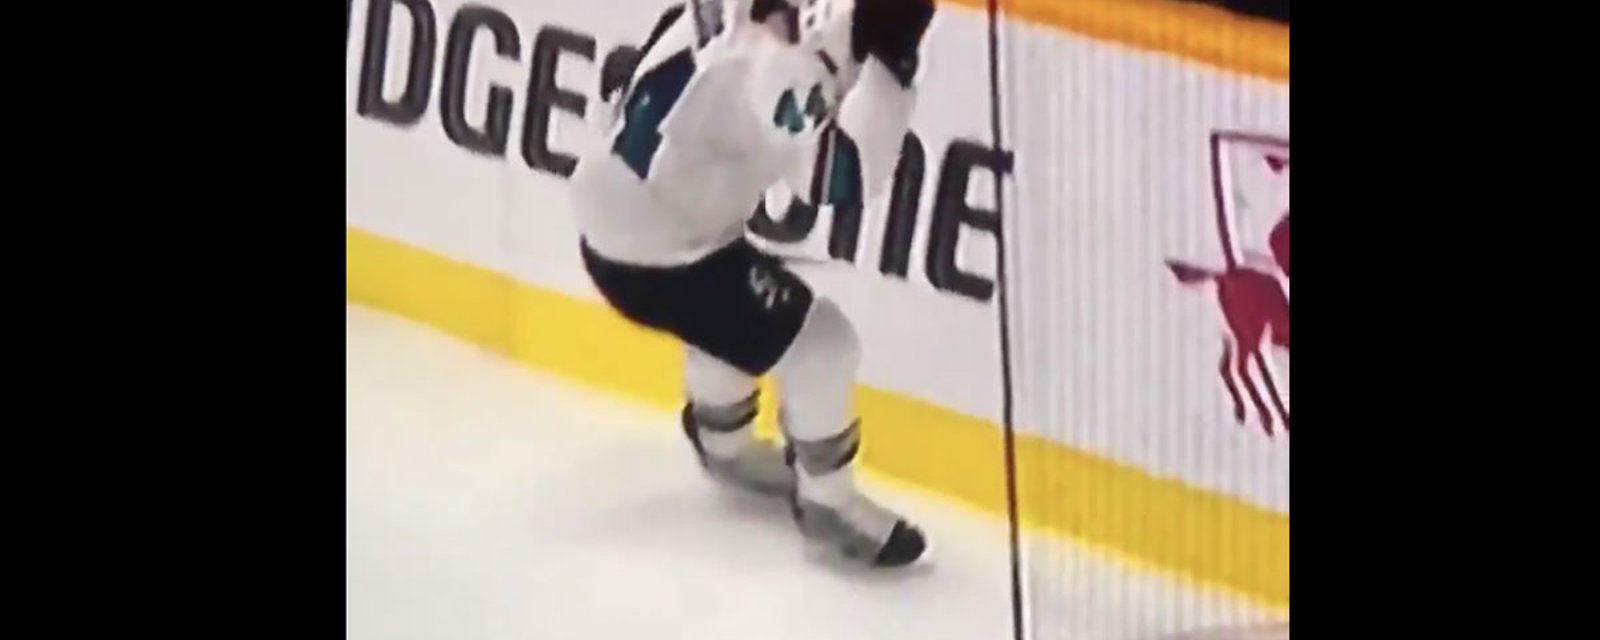 Must see: Vlasic pulls most embarrassing move of the season!